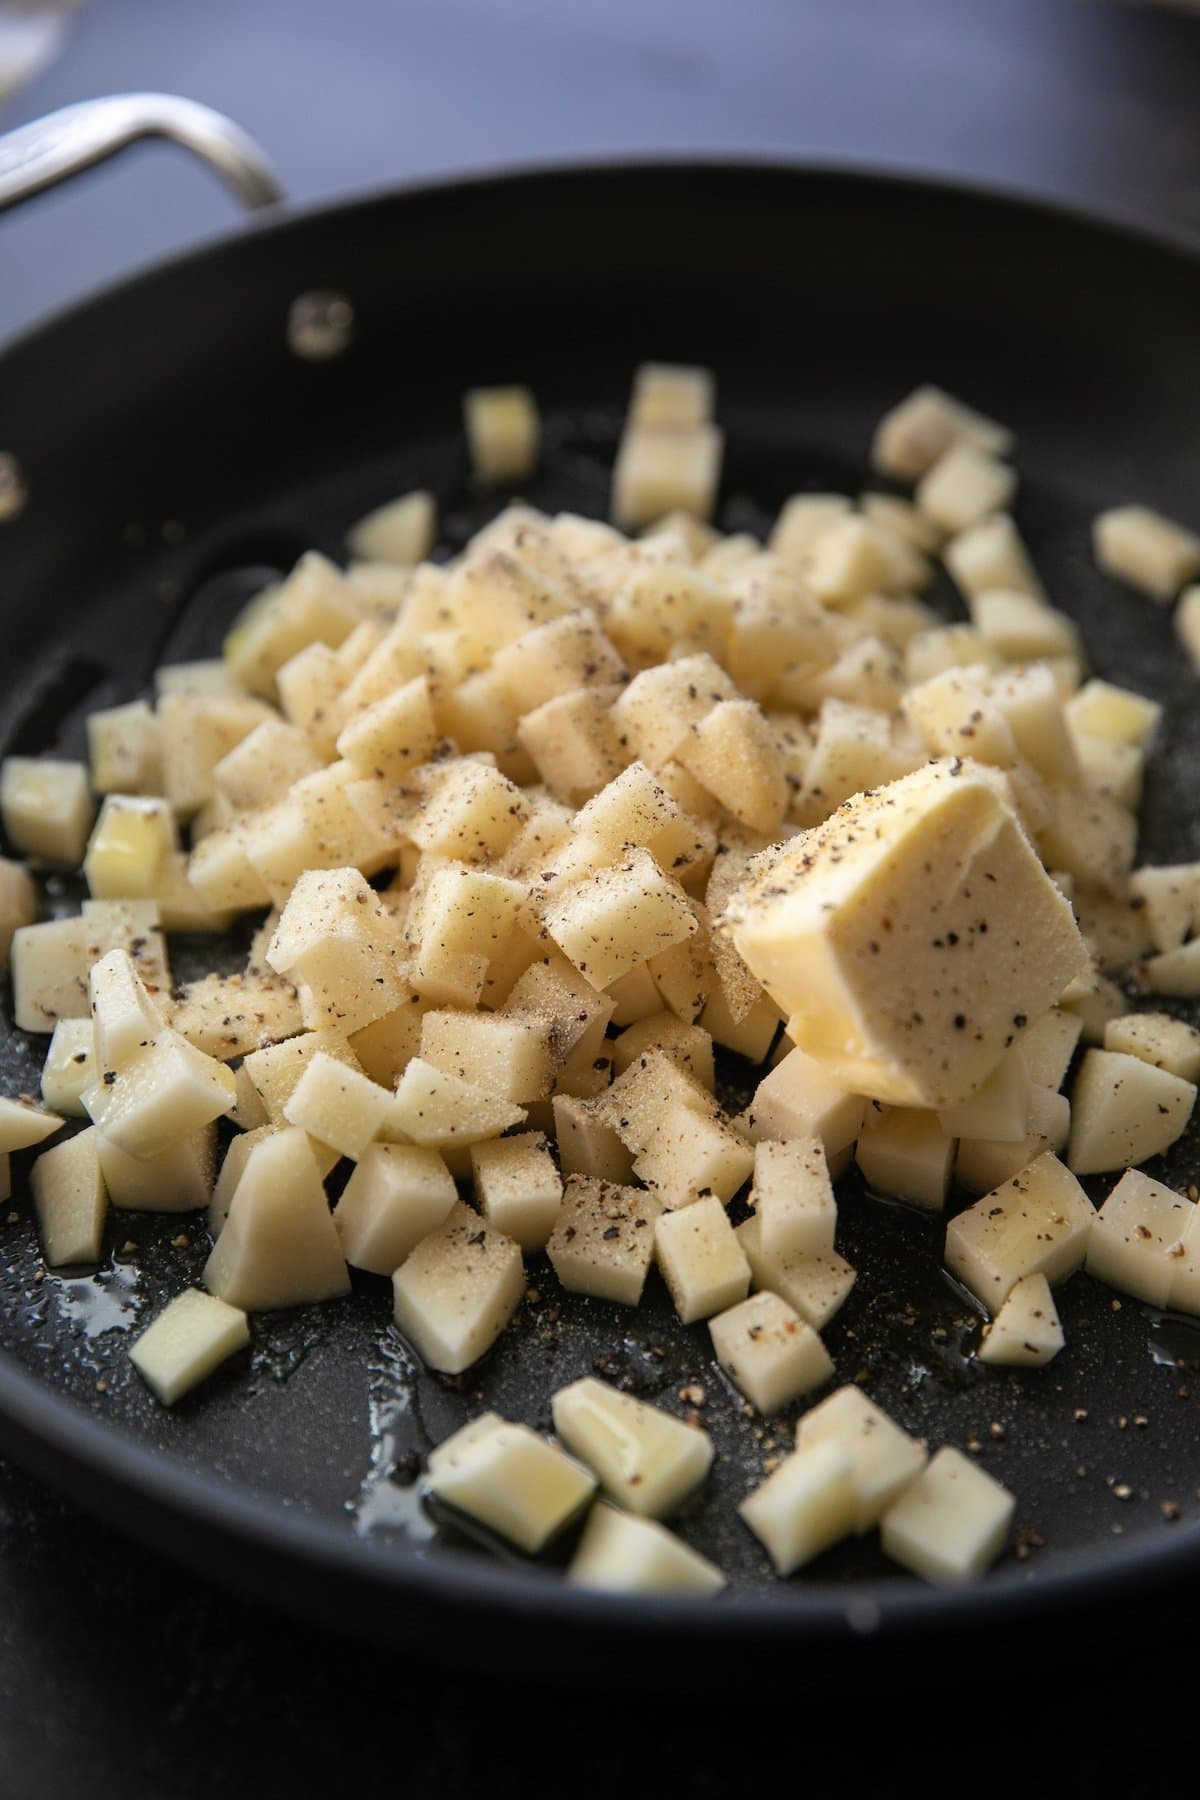 diced potatoes in a pan with butter and seasonings